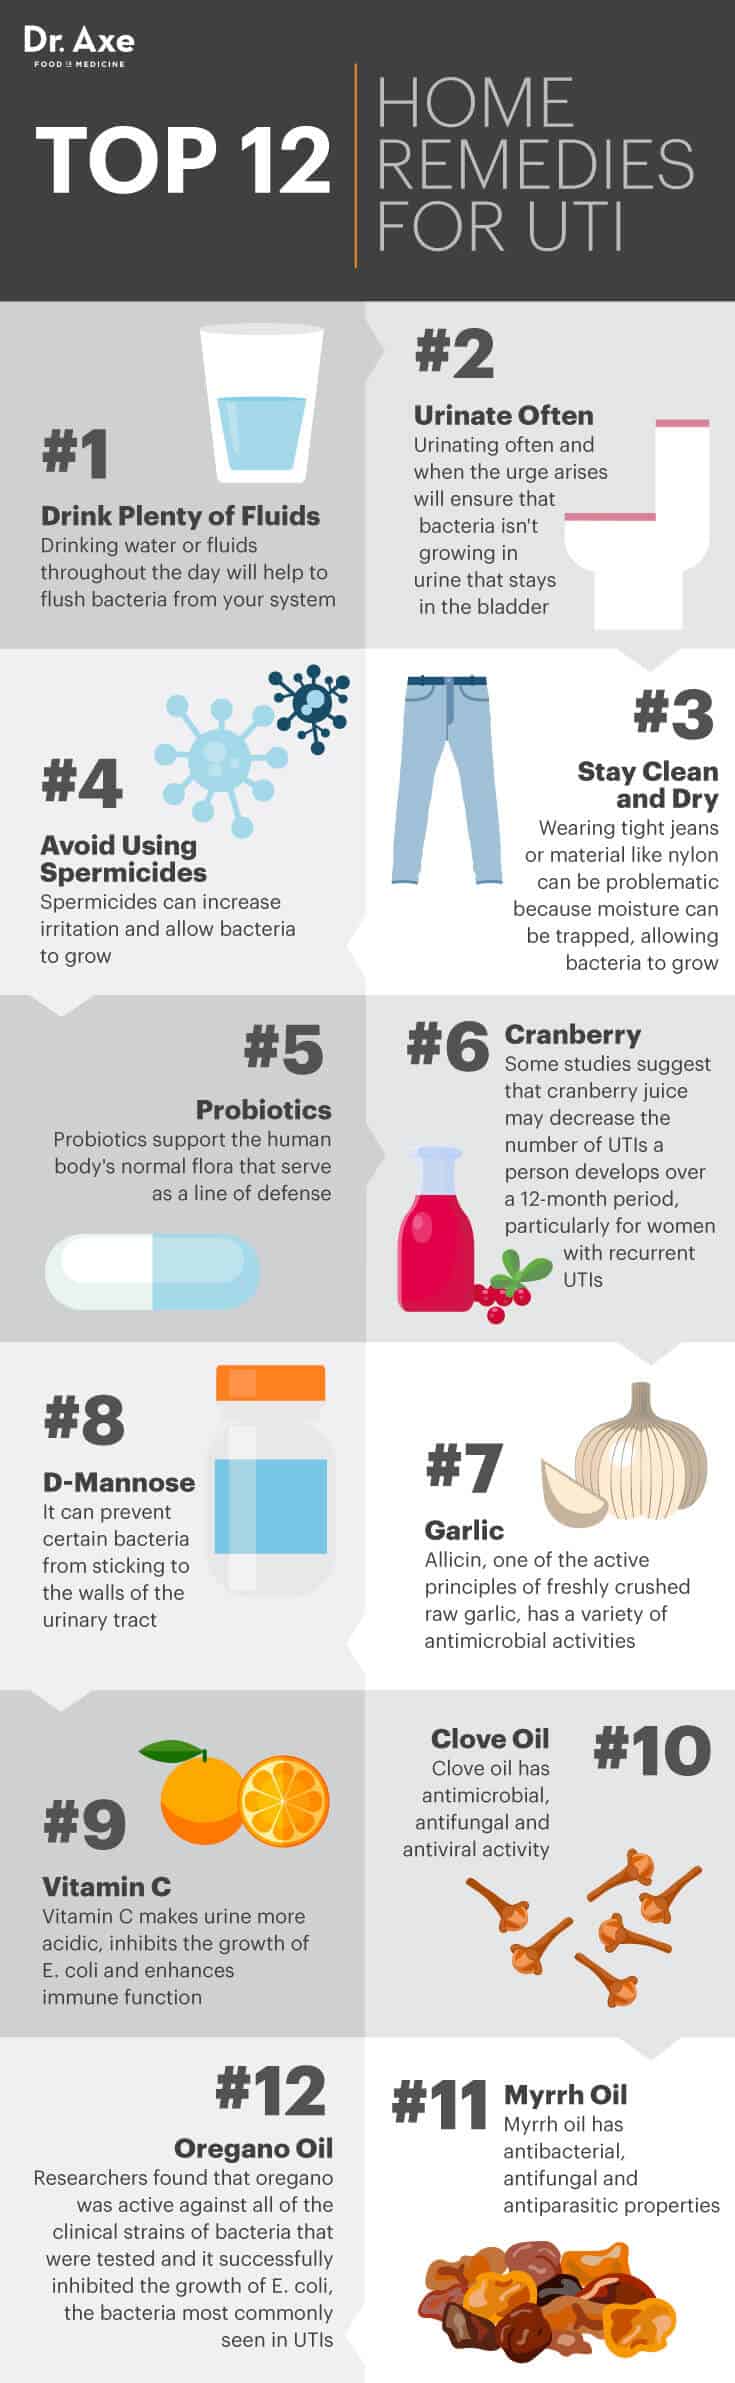 Top 12 home remedies for UTI - Dr. Axe